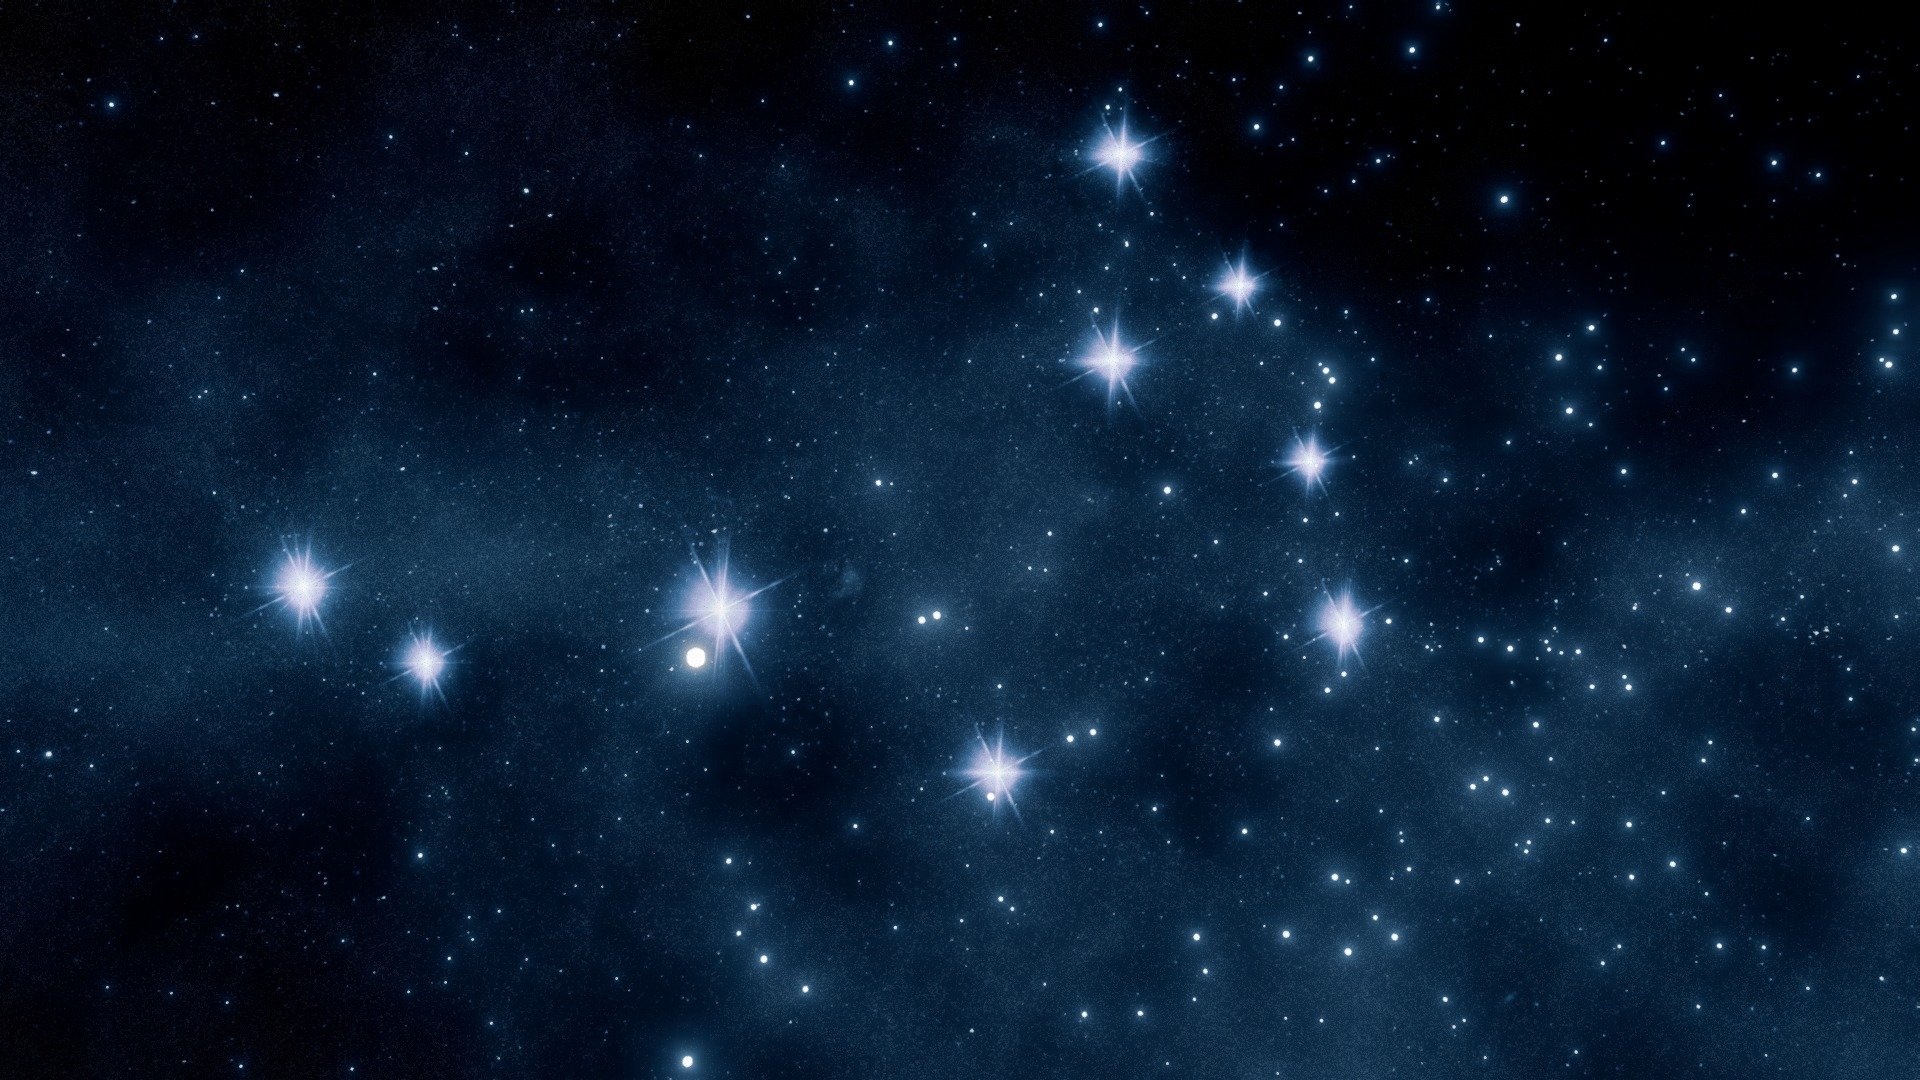 Artist's impression of an open cluster, a type of star cluster consisting of a few hundreds to a few thousands stars immersed in a tenuous nebula. They are found in spiral and irregular galaxies and originate from giant molecular clouds. The stars belonging to an open cluster are all formed at approximately the same time and distance. For this reason, the study of these clusters is of great interest to astronomers because they offer the unique possibility of studying how stars form and evolve as a function of their mass. The Milky Way hosts open clusters within and between the spiral arms. One of the most popular open clusters near Earth is the Pleiades, also known as the seven sisters (see figure). It consists of hot, middle-aged B-type stars and is visible in the northwest of the constellation Taurus, at a distance of approximately 444 light-years from Earth.

Image credit: NASA/ESA/AURA/Caltech - Bright stars of an open cluster - Buy Royalty Free 3D model by Salvatore Orlando (@sorlando) 3d model